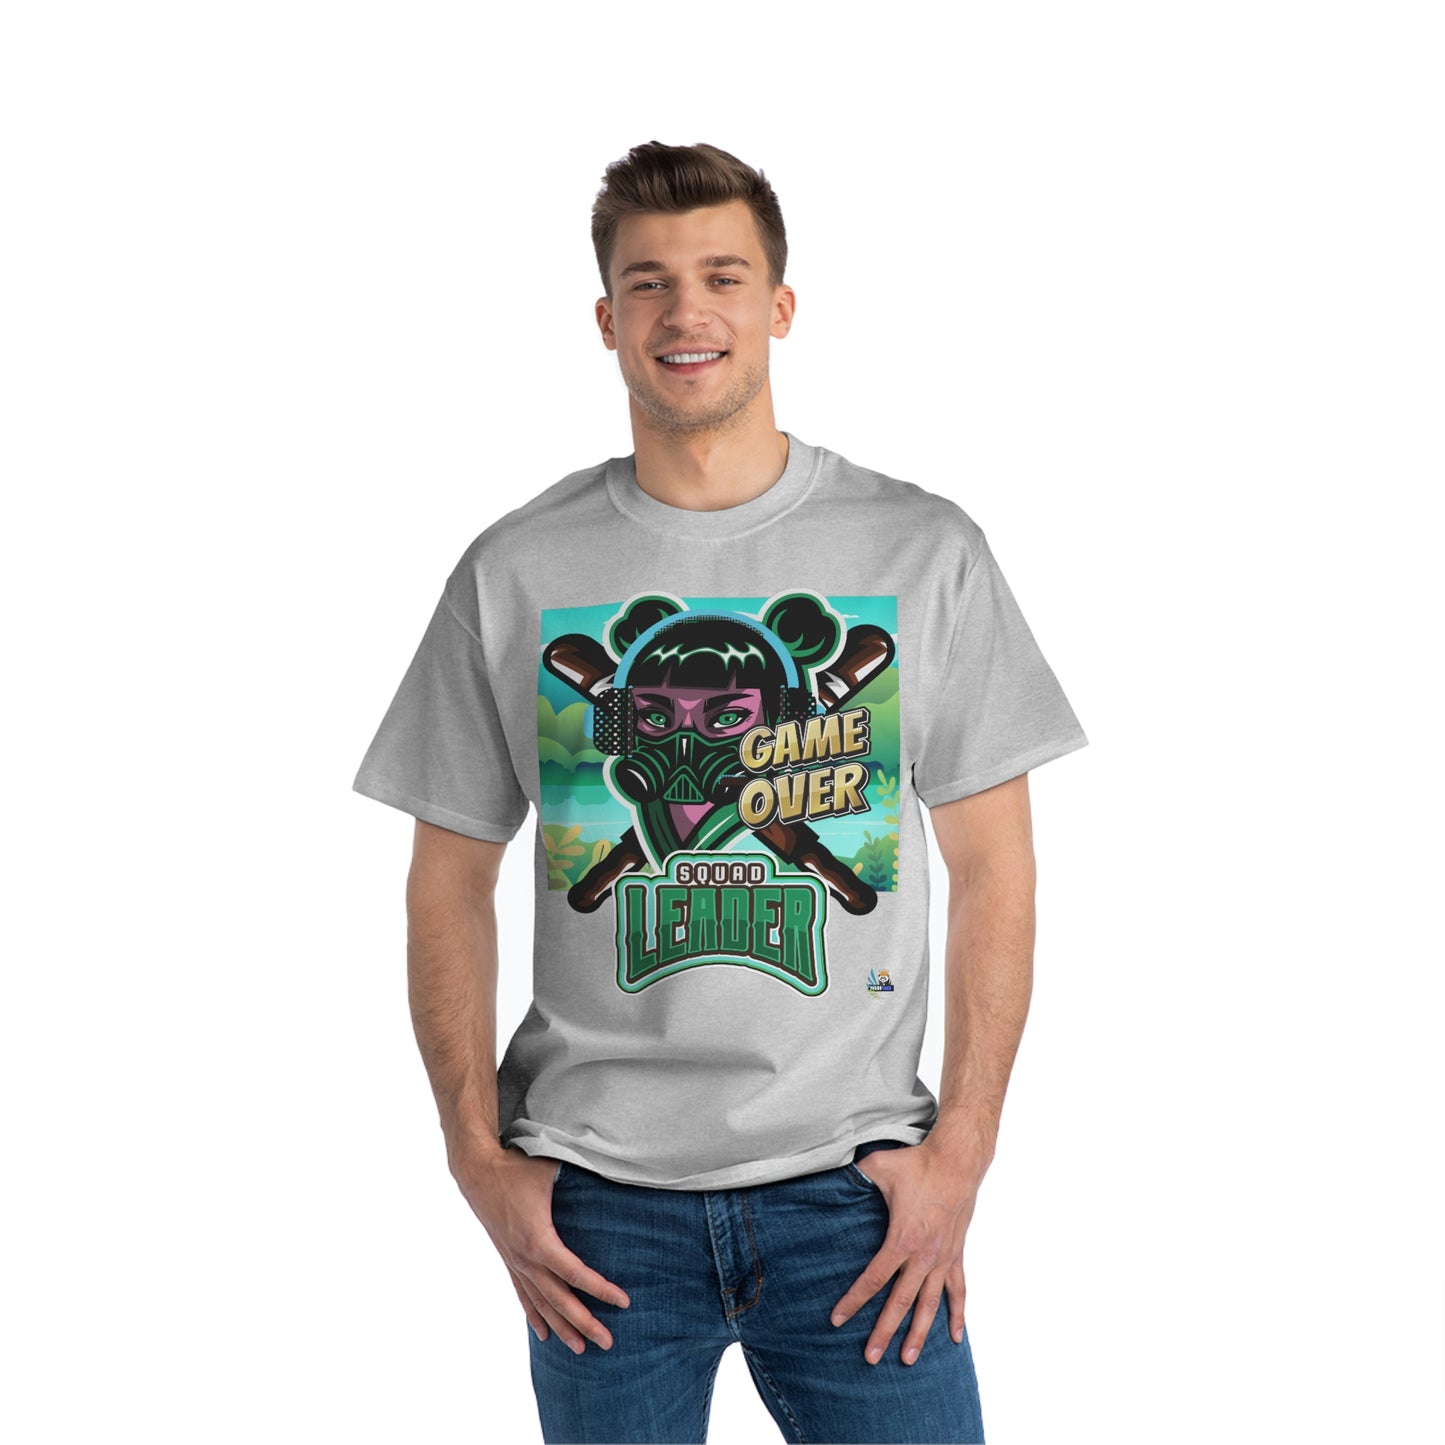 Squad Leader Game Over Heavyweight Unisex Gaming Tee